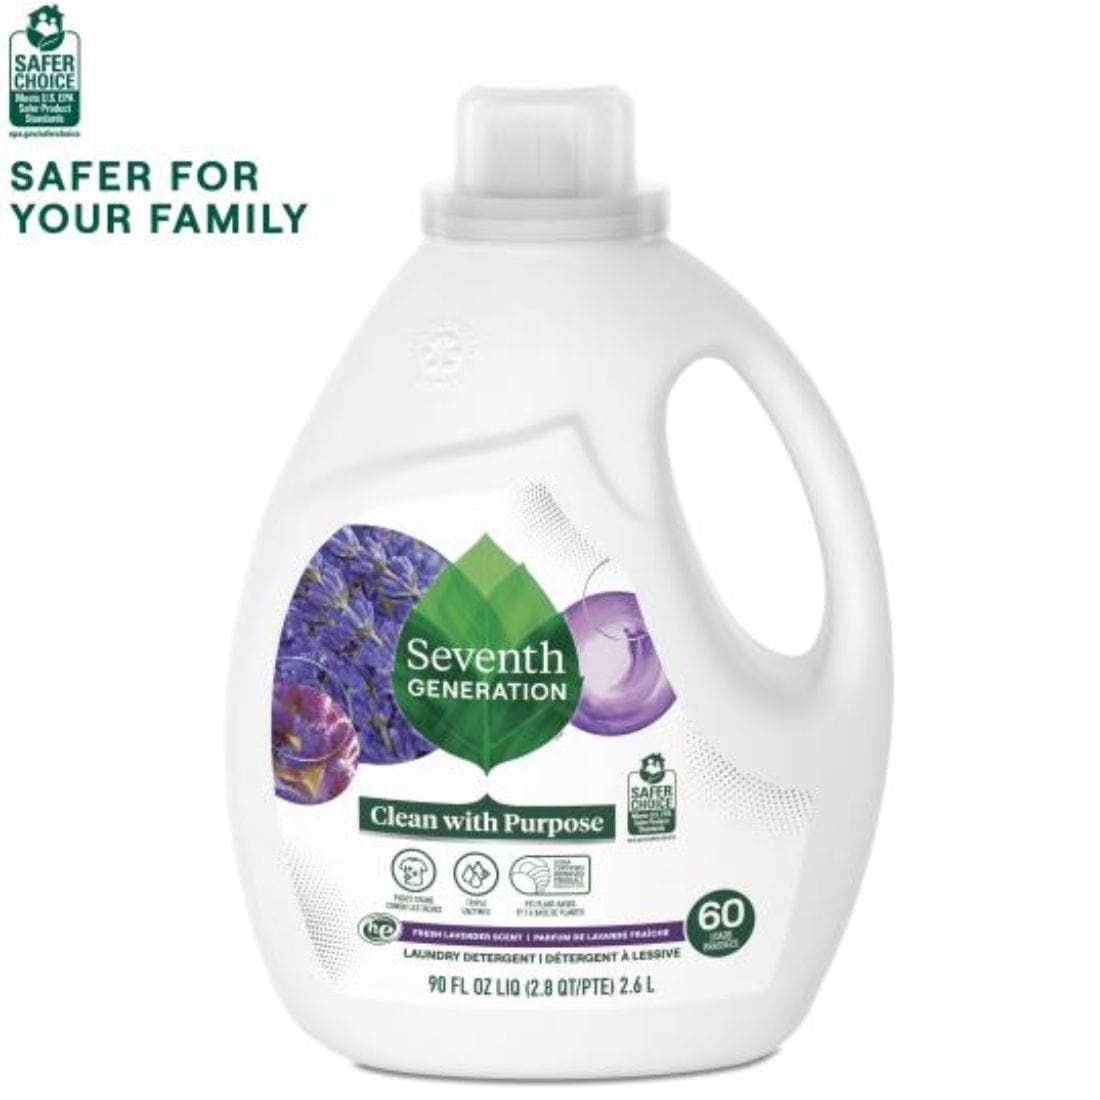 Seventh Generation Laundry Detergent 33 Loads (0% Synthetic Fragrances or Dyes), 1.47L